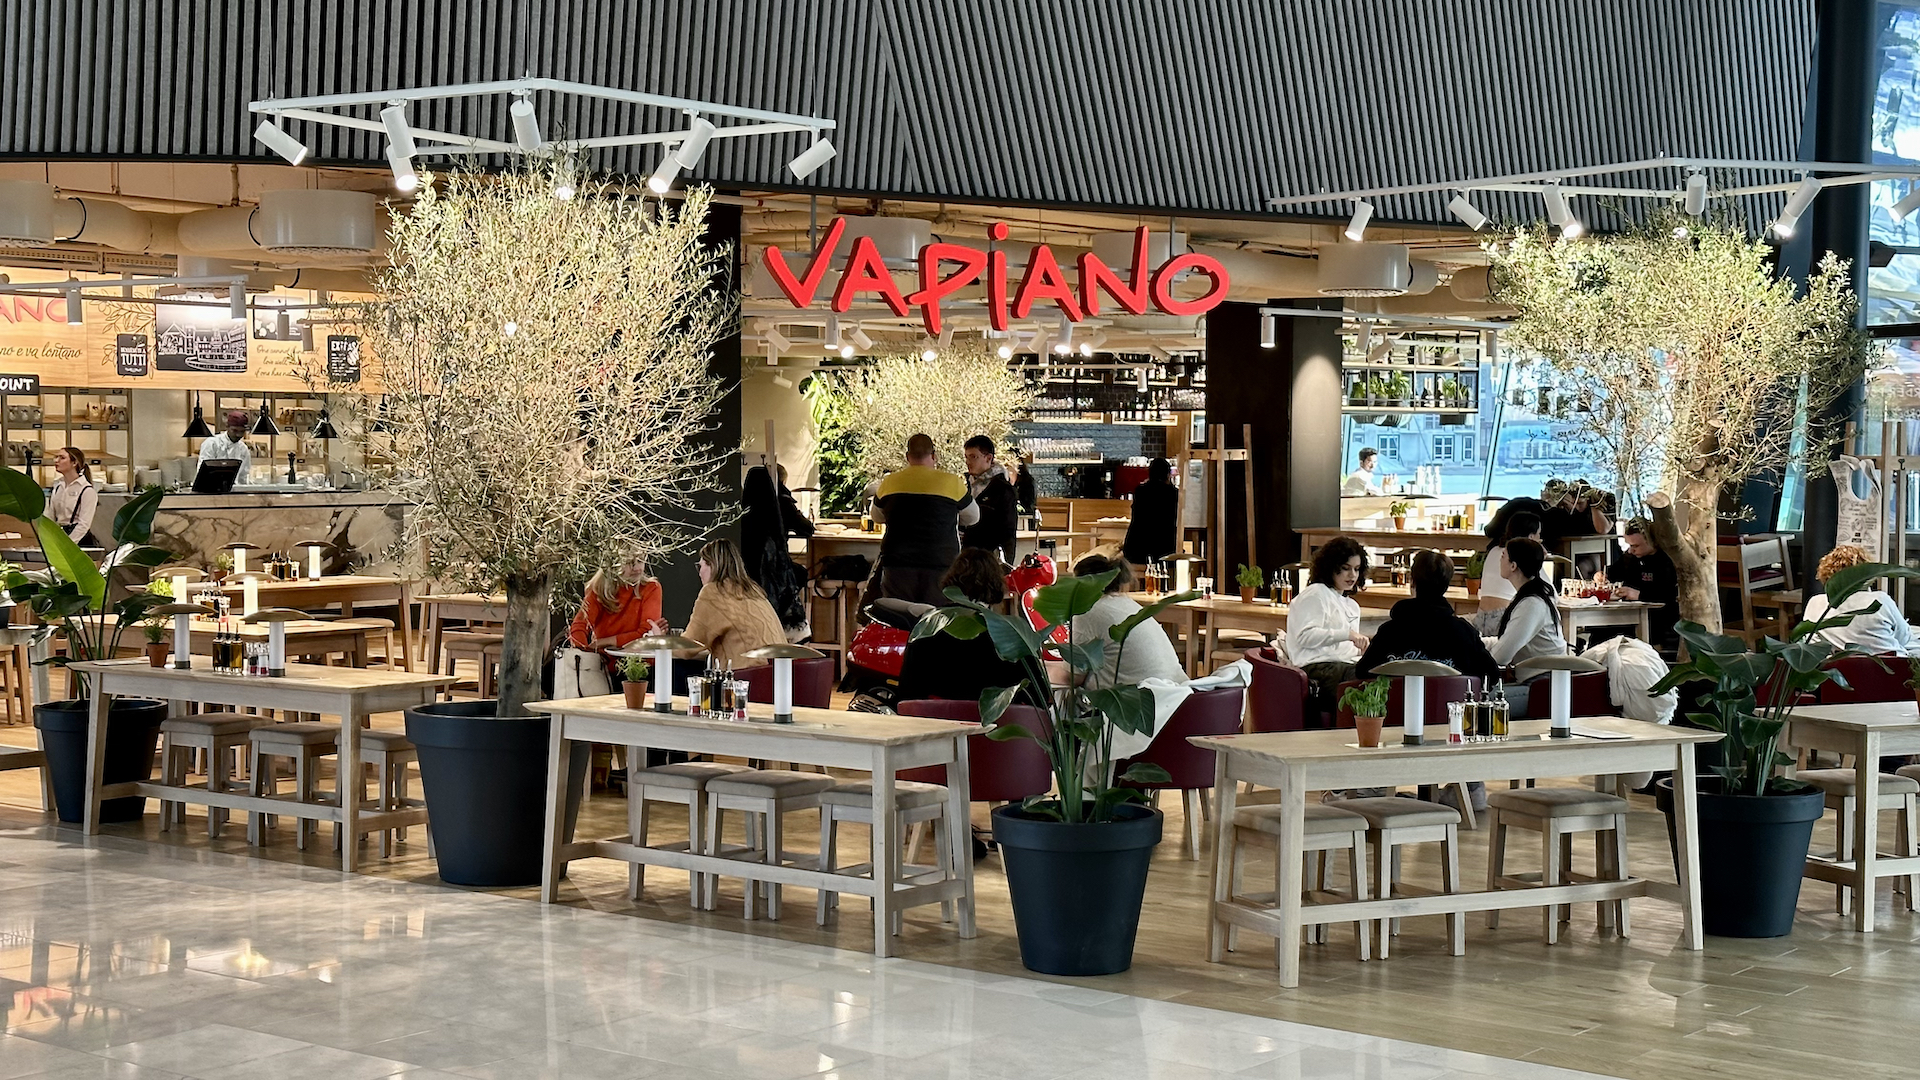 Design and delivery of new lighting for the VAPIANO gastro operation